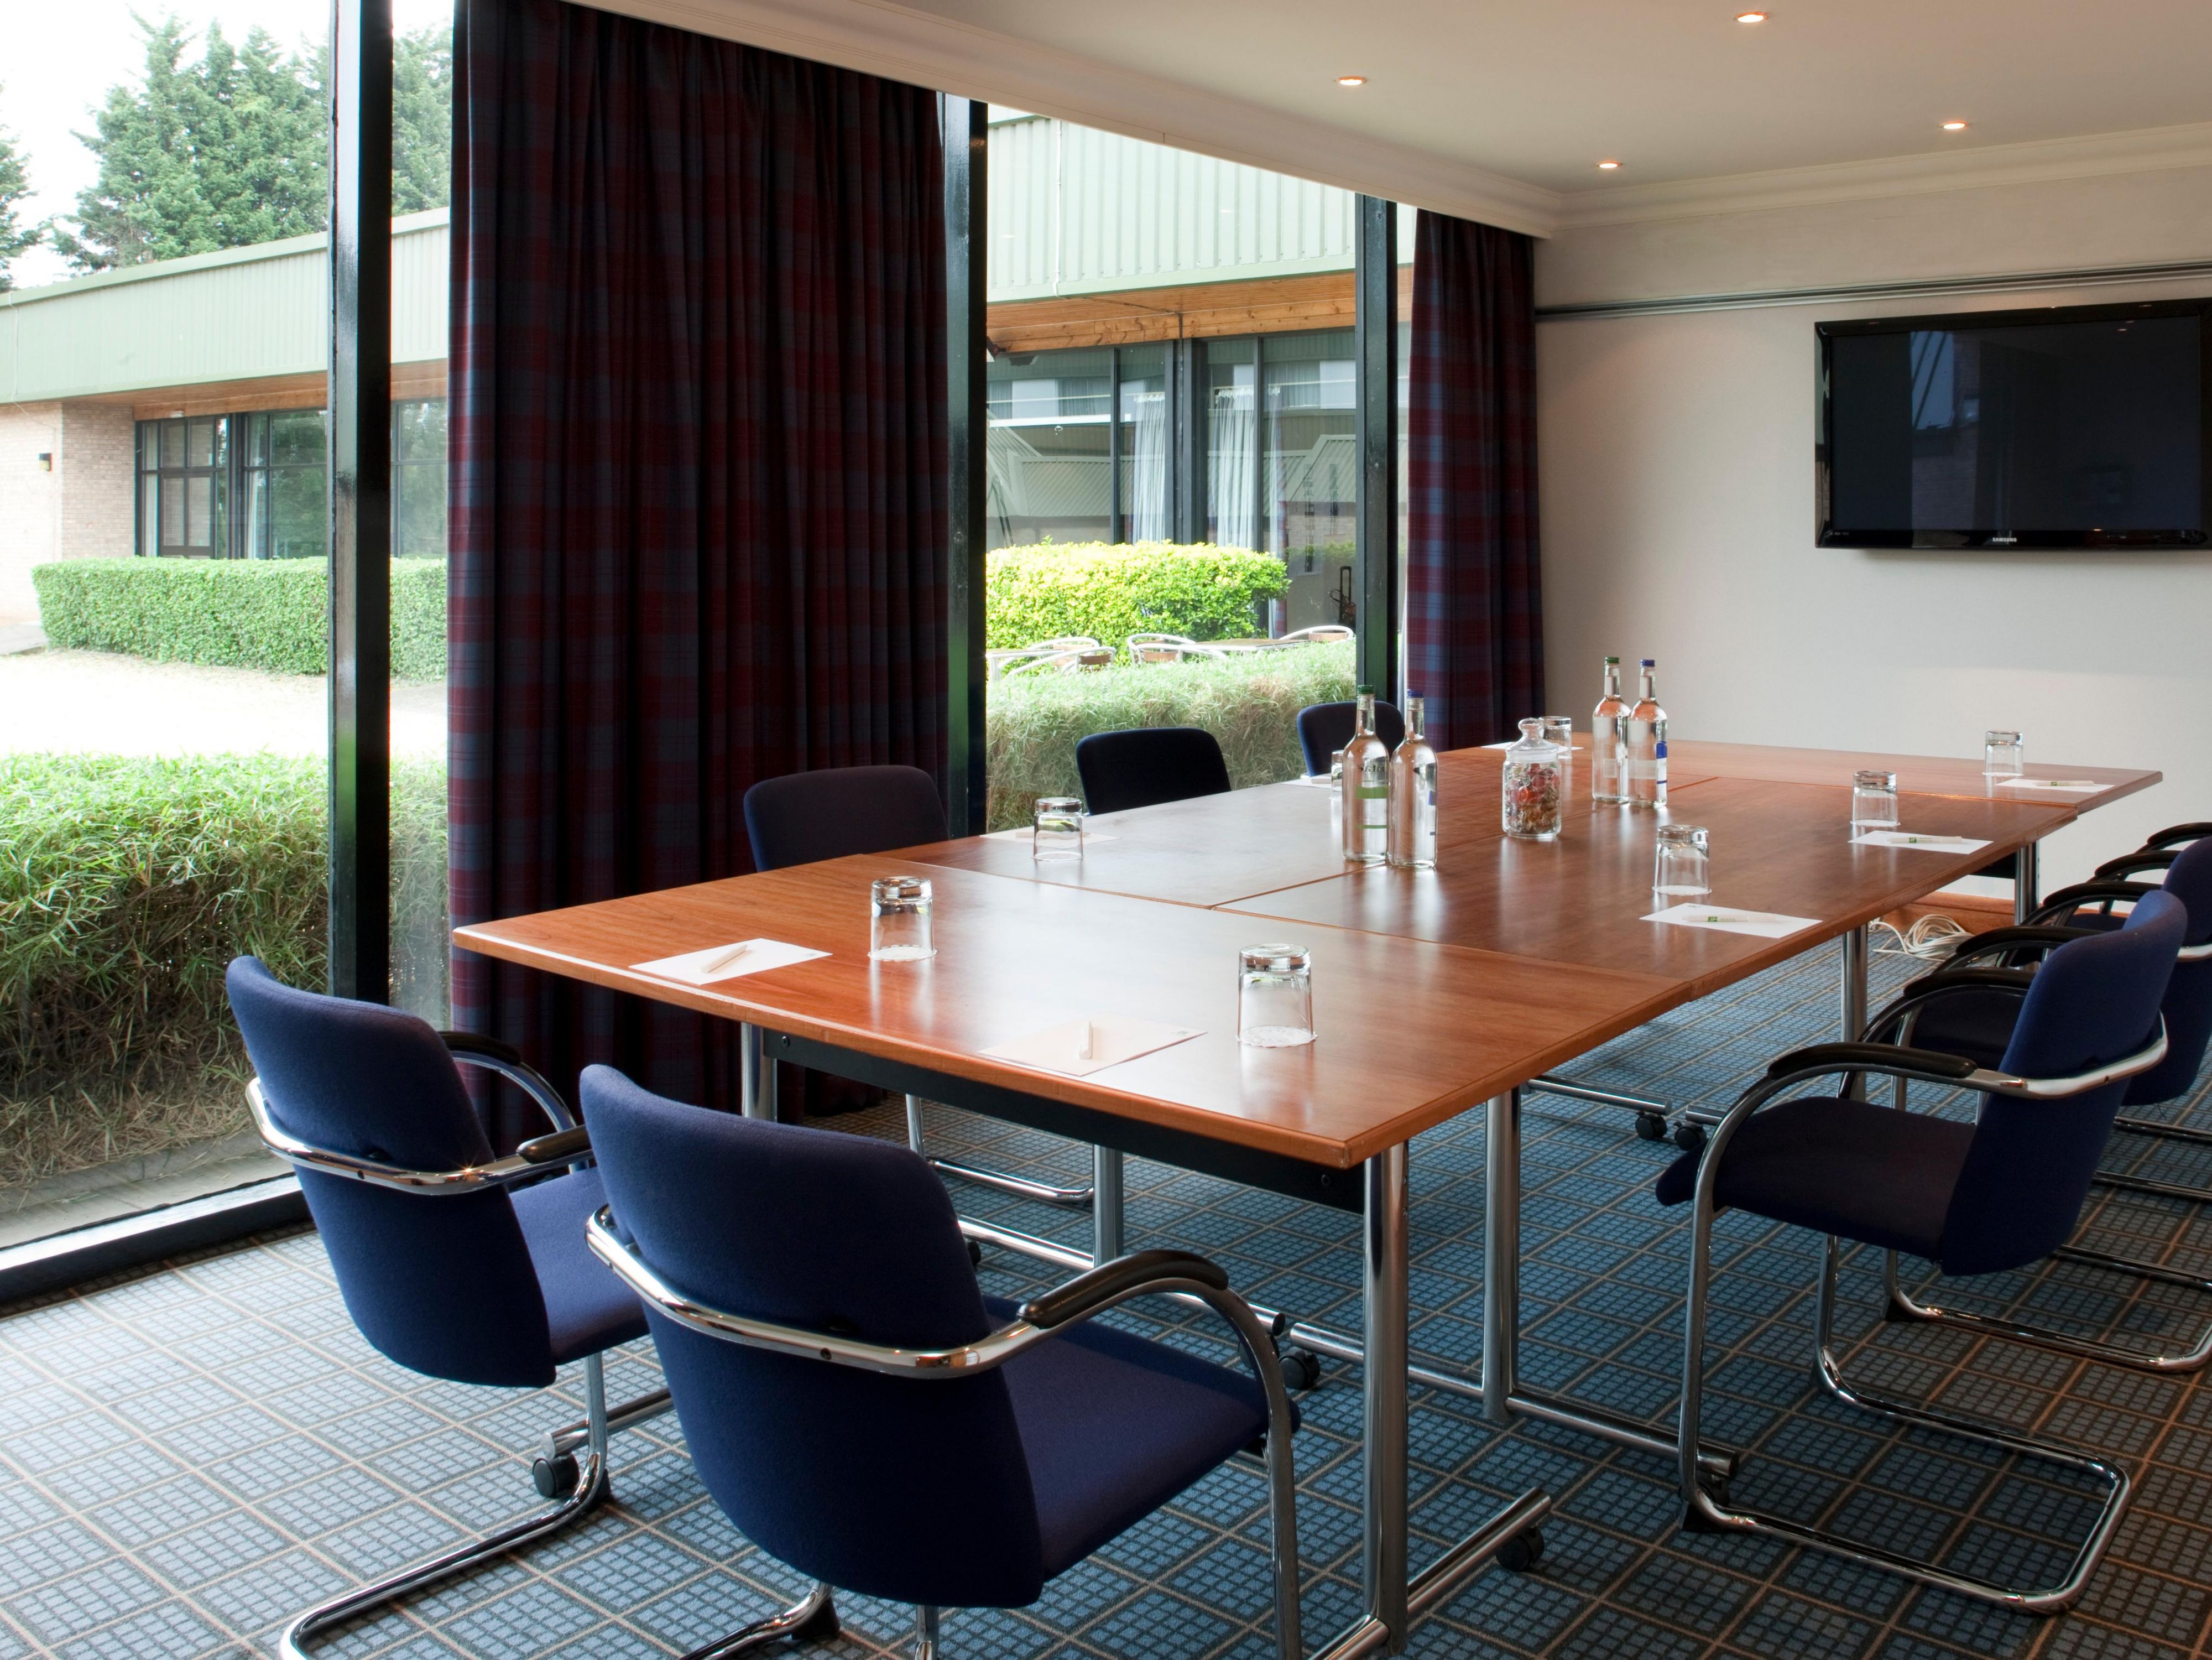 With a range of meeting and event spaces for up to 260 guests, the hotel is a perfect choice for both business meetings at our Academy Conference Centre and weddings and other celebratory events.   Our dedicated team are on hand to support with both planning and delivery of your event.